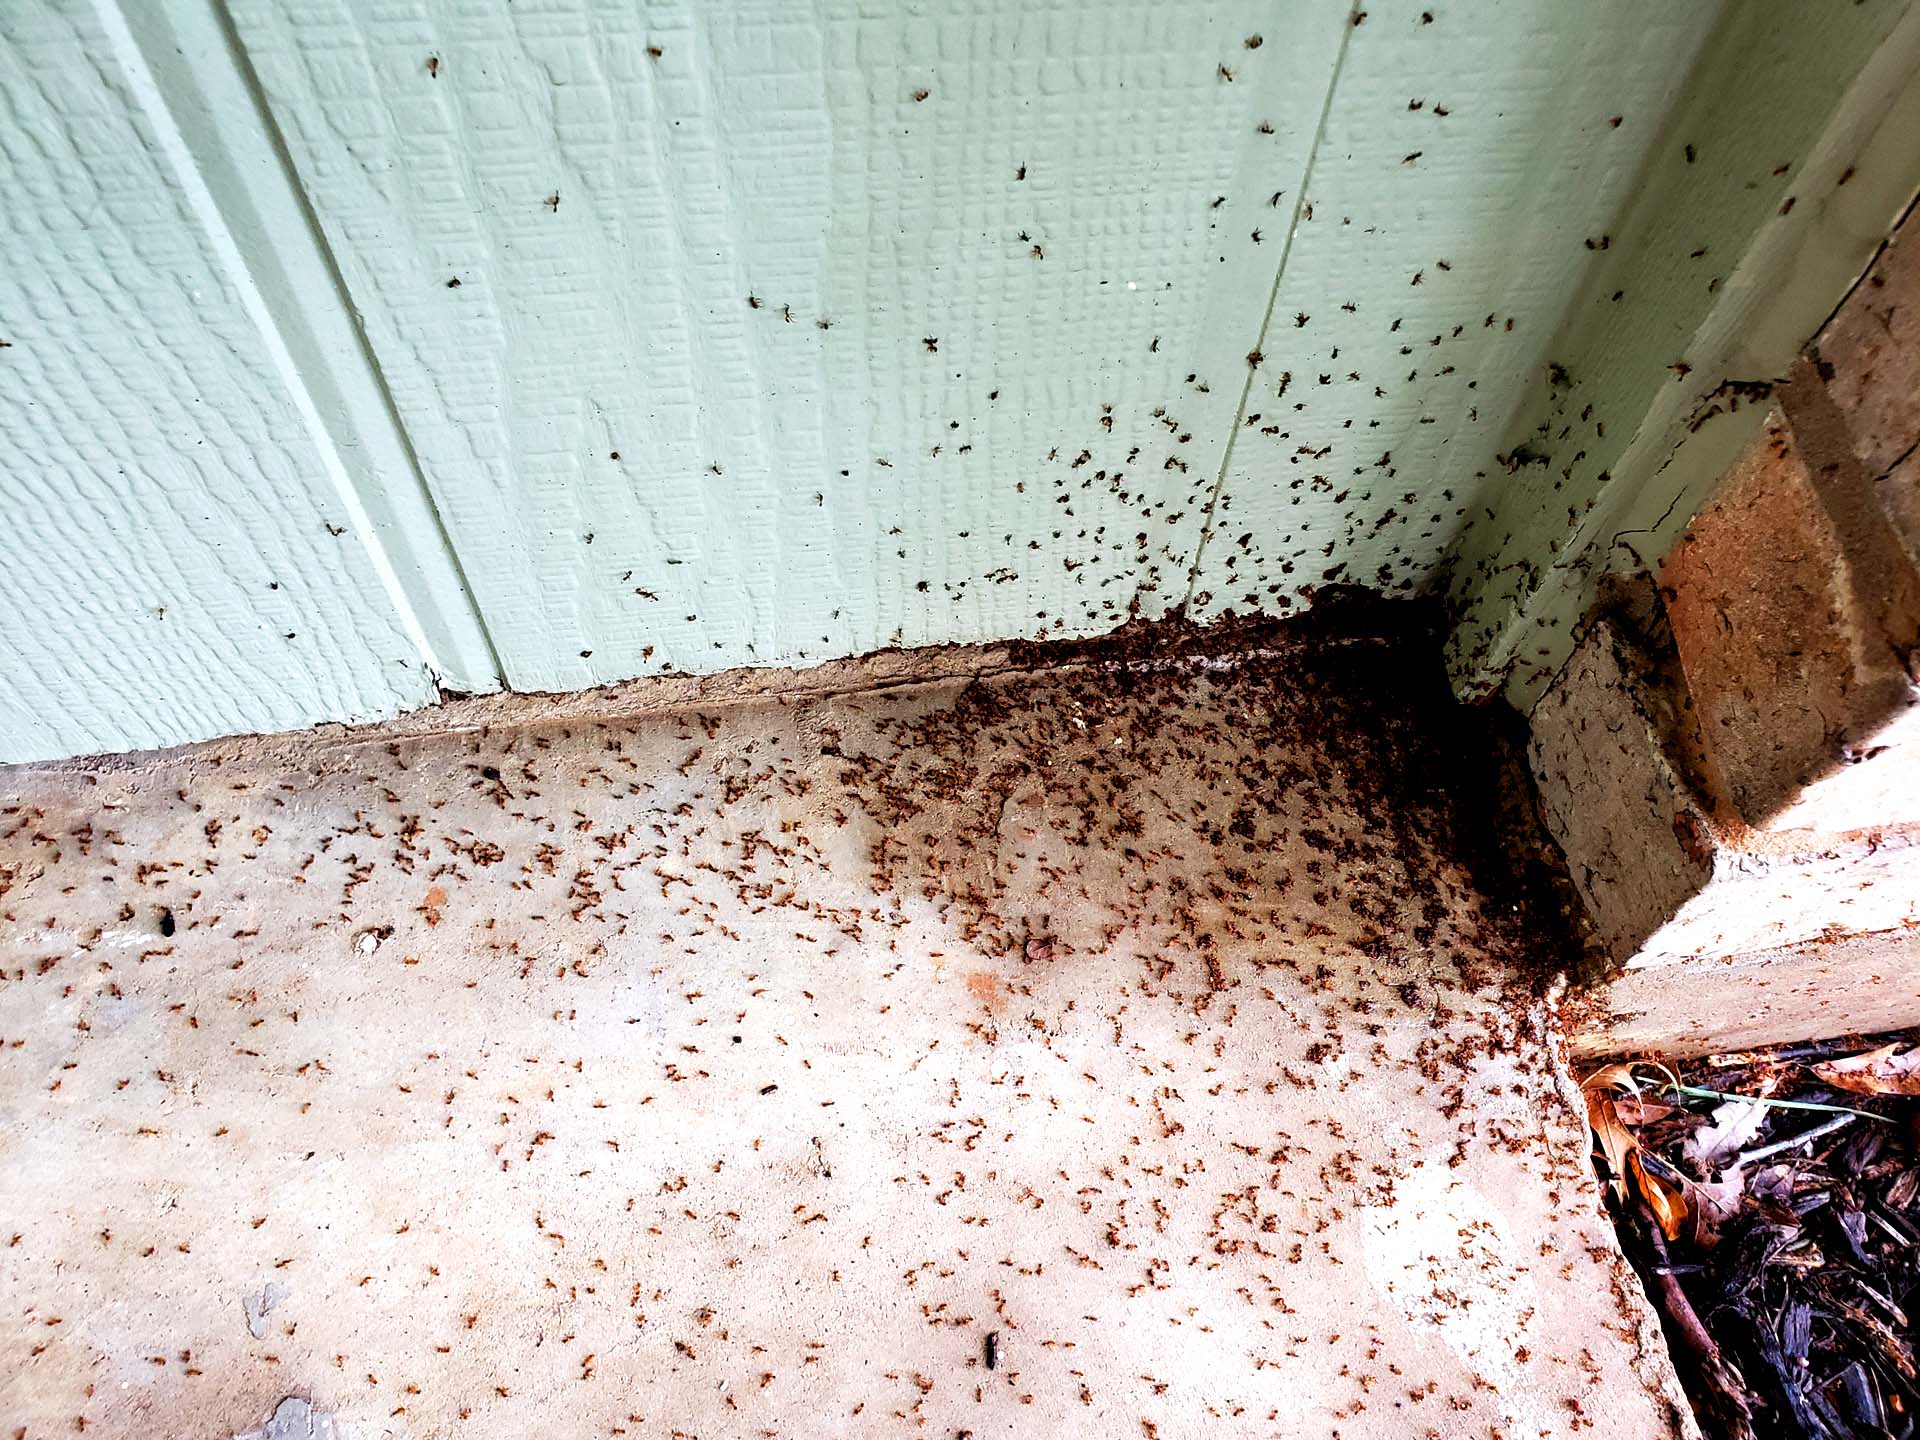 Shown here are ants in the Dallas Fort Worth region by Certified Applicator Steve Moseley of Bullseye Pest Management.